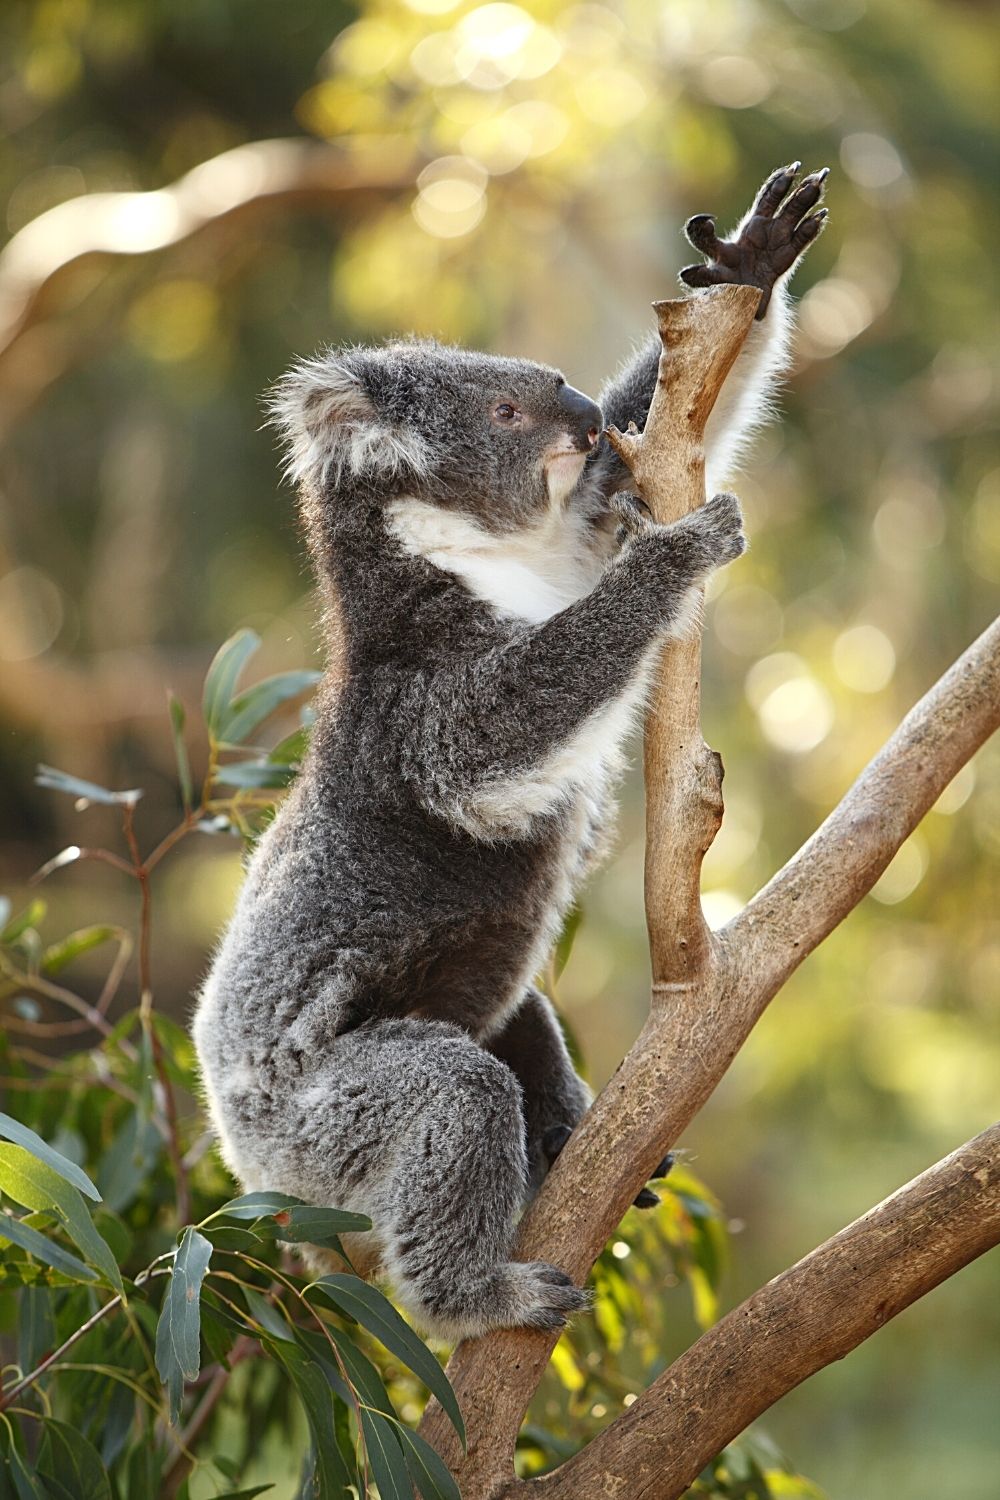 Koalas have strong limbs and teeth that help them during eating and climbing